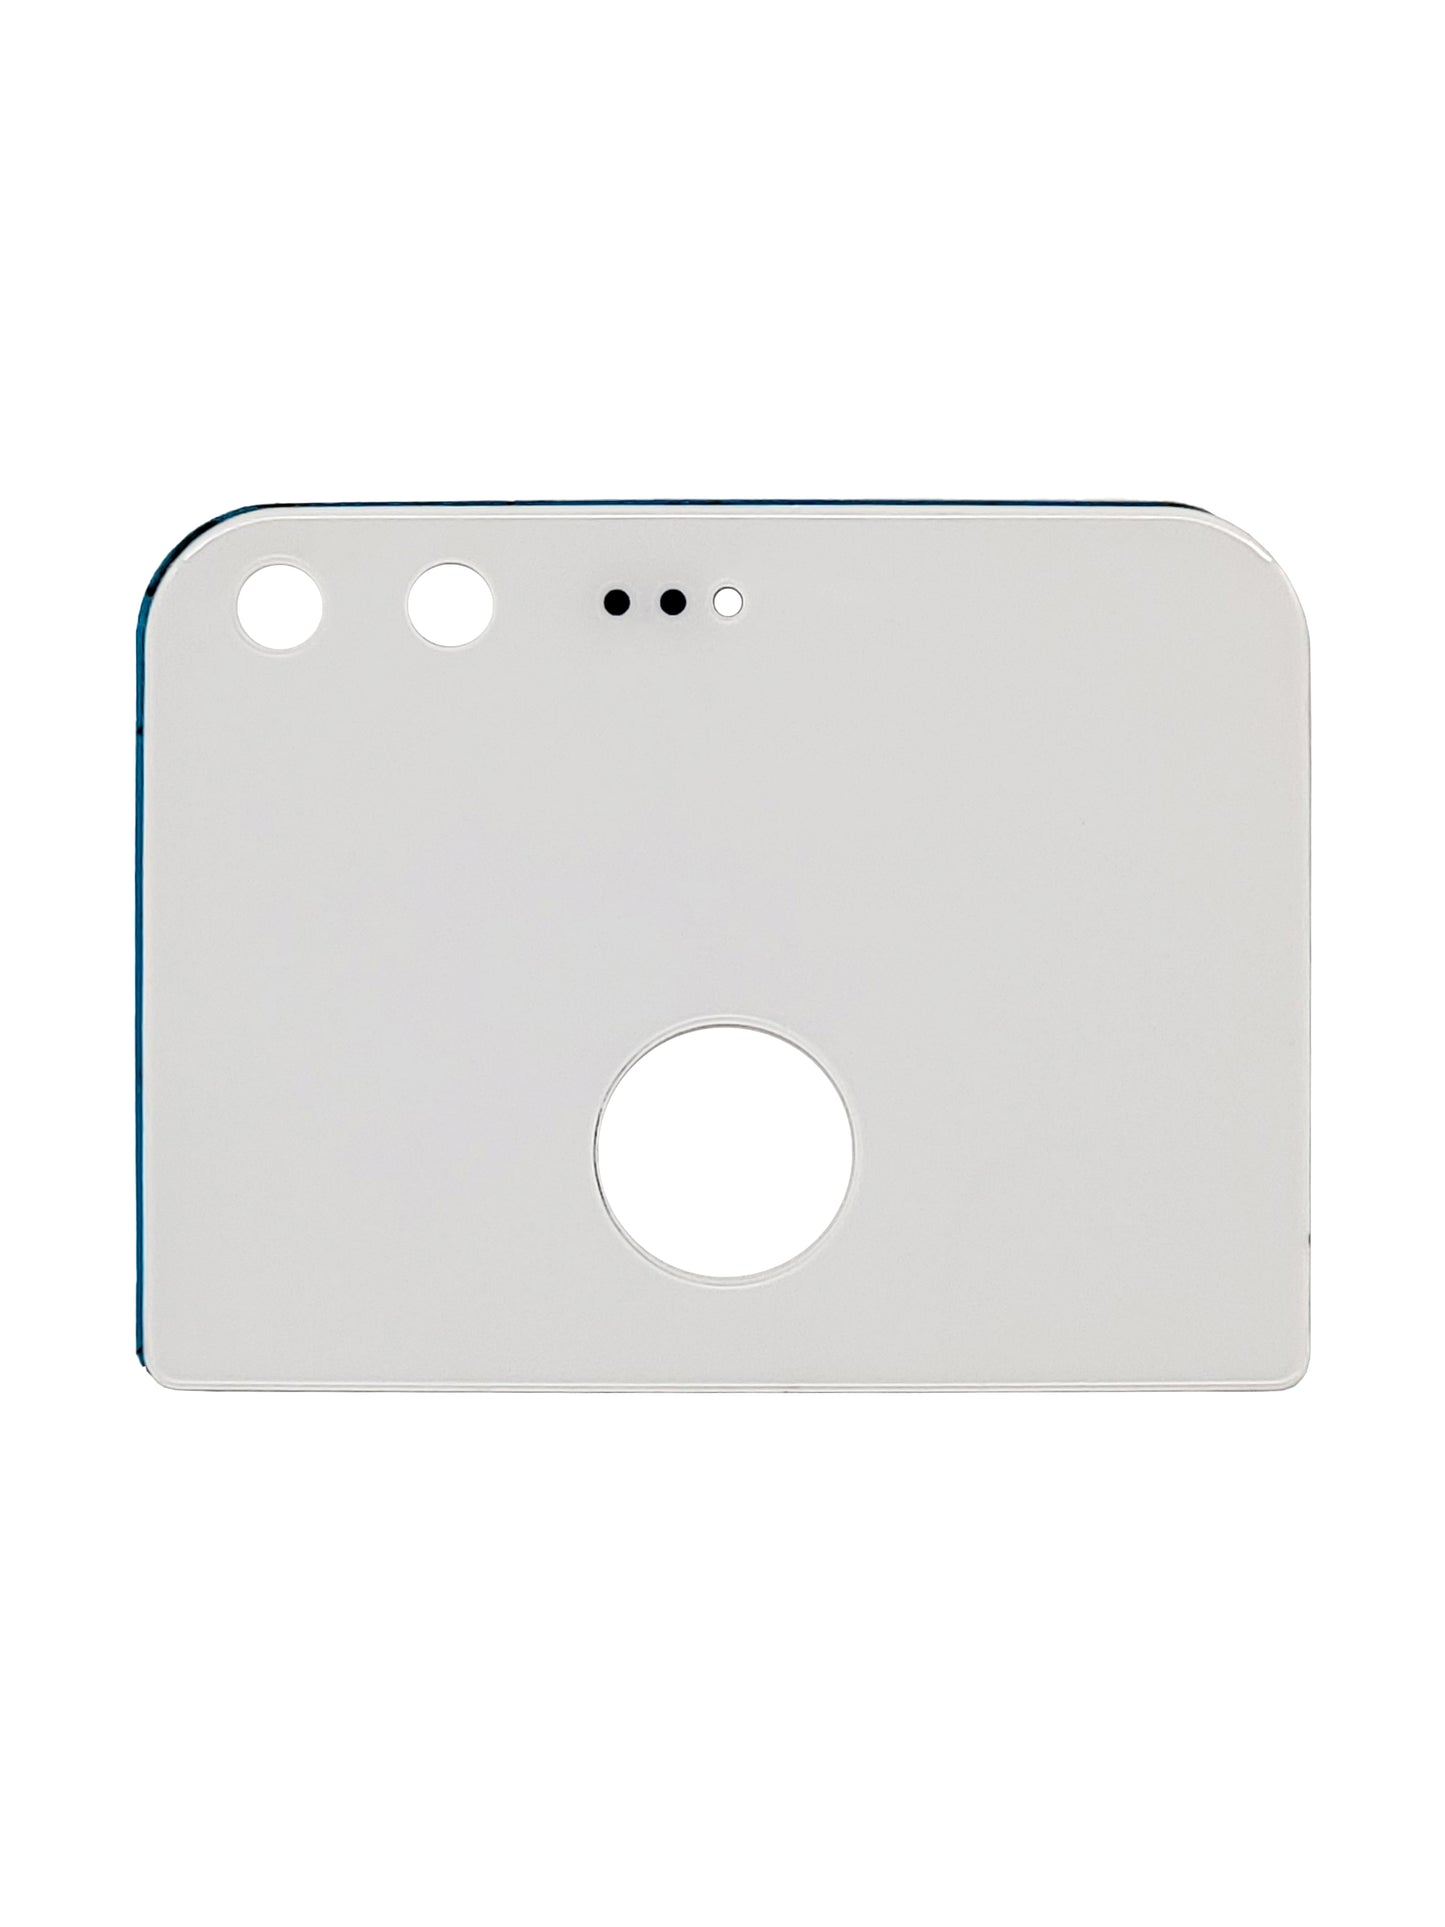 GOP Pixel Top Back Cover (White)